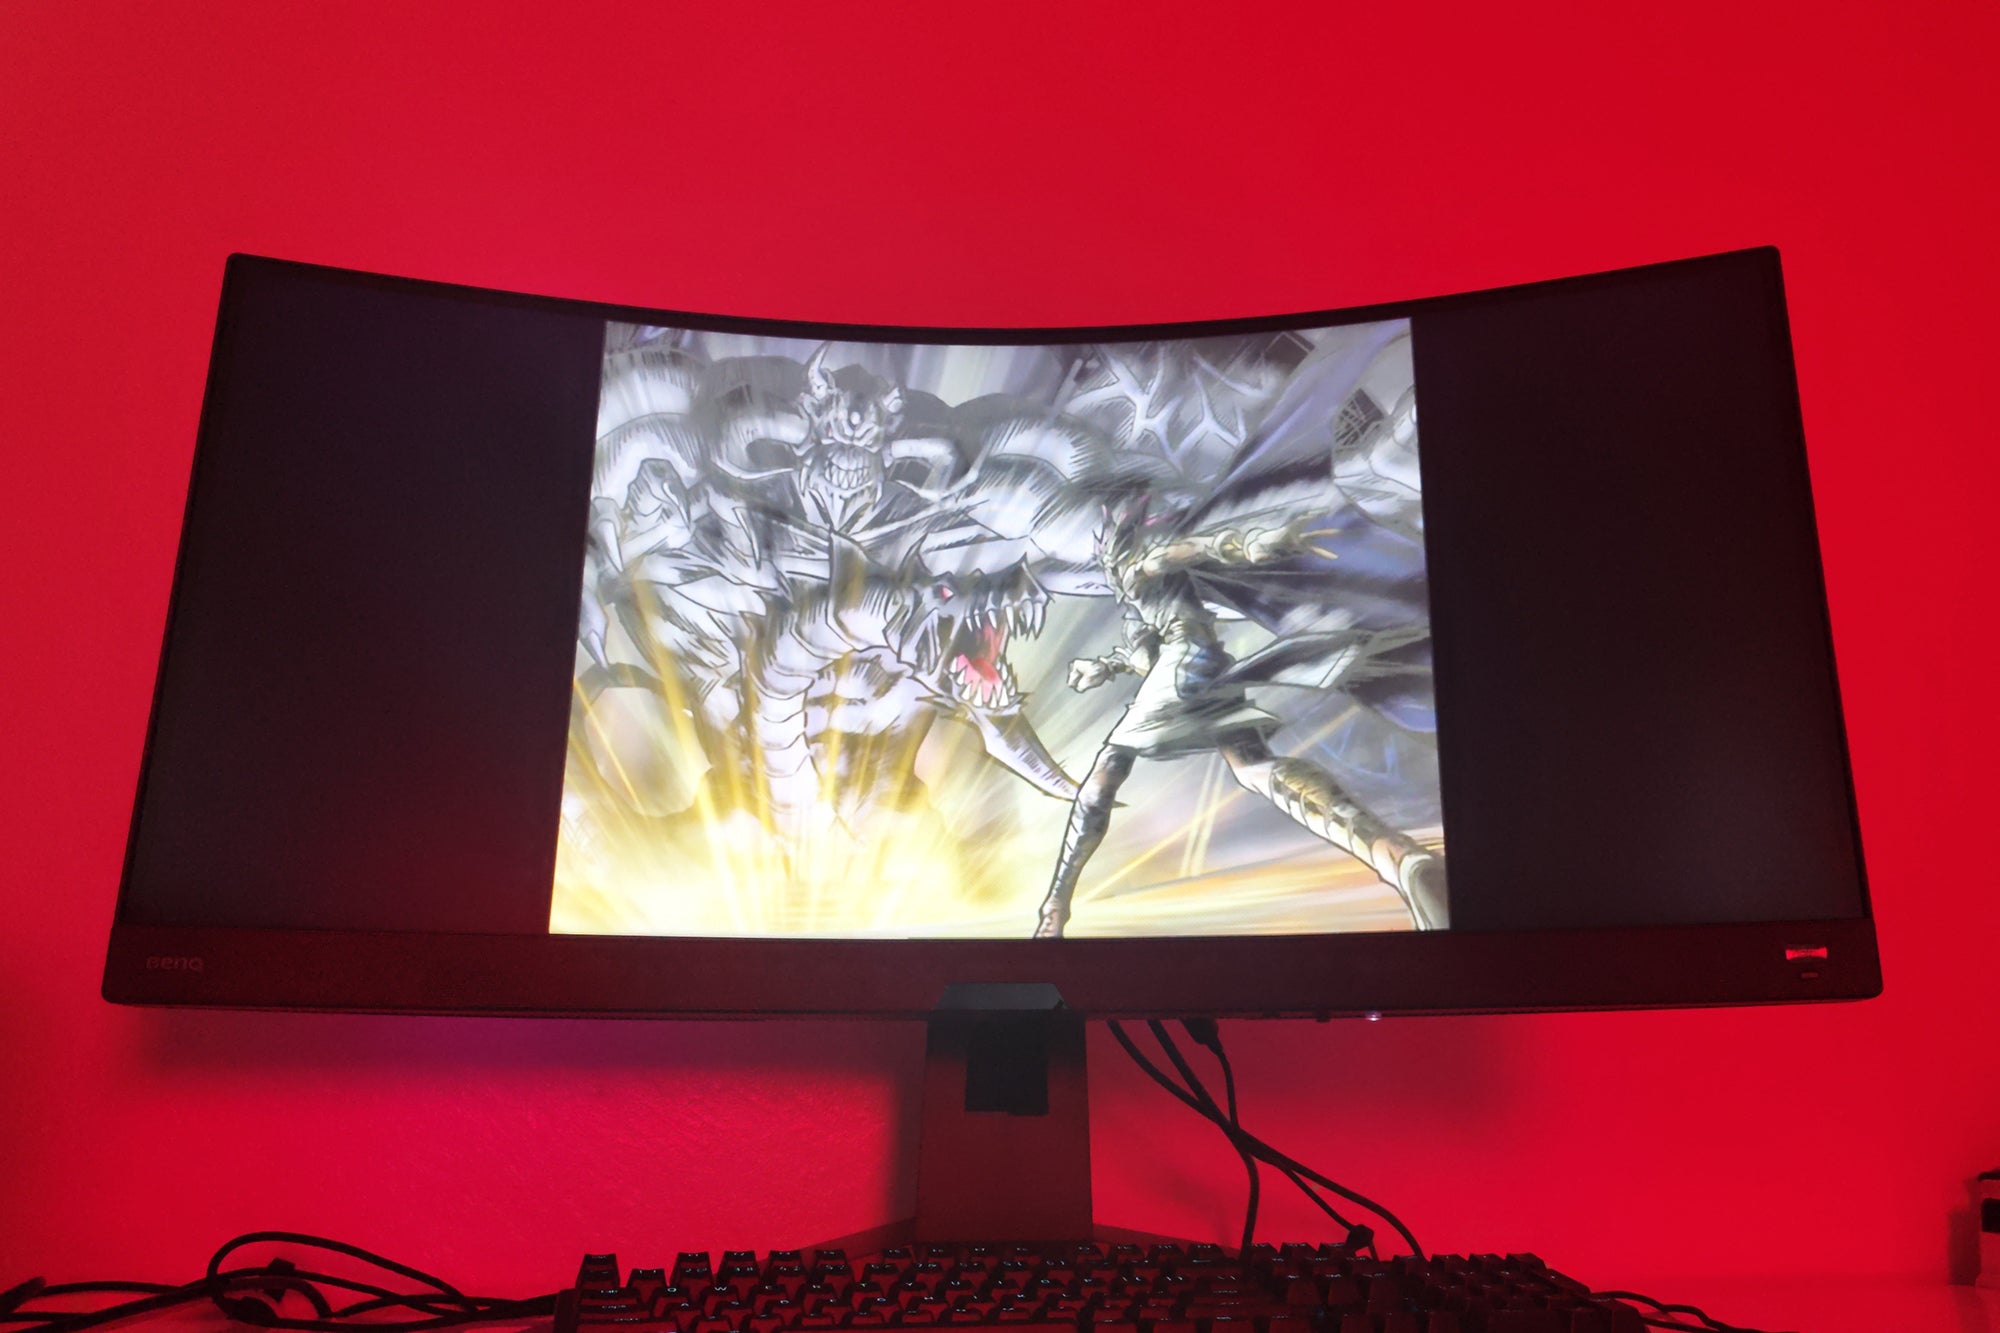 MSI's Concept MAG Gaming Monitors With Neon Genesis Evangelion Anime Theme  Pictured